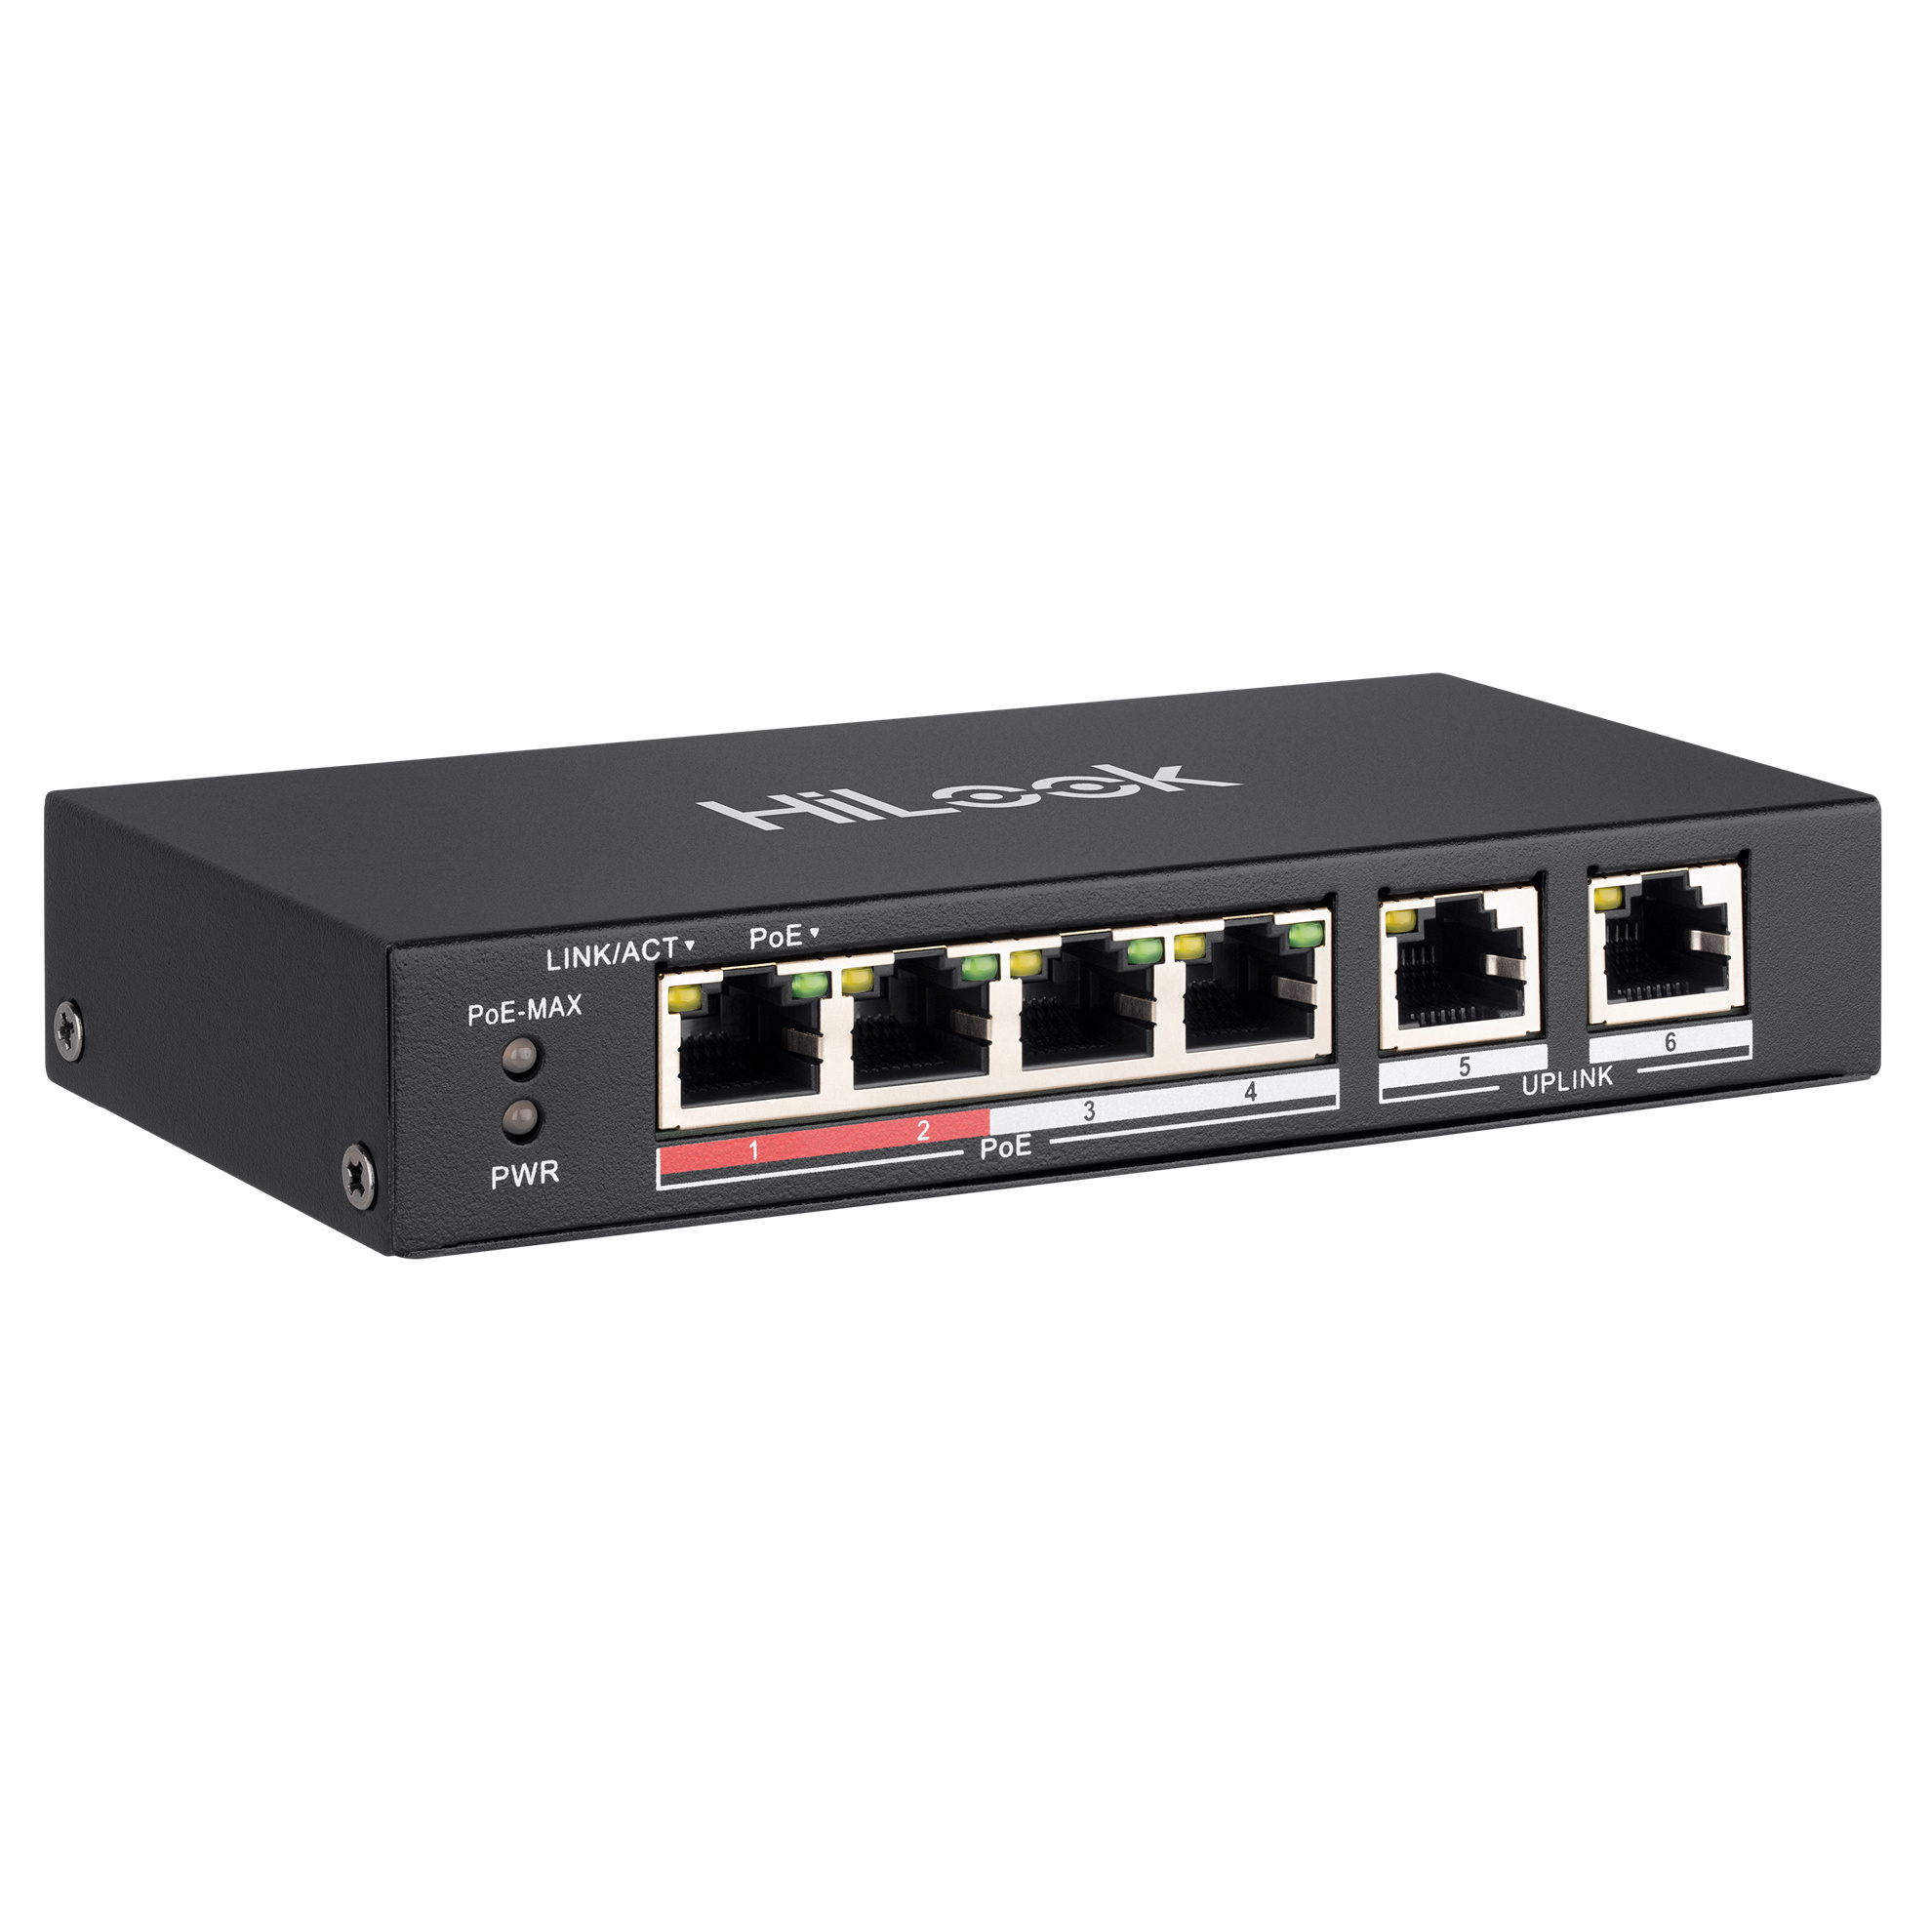 HiLook NS-0106P-35 4 Port 10/100 Fast Ethernet Unmanaged POE Switch